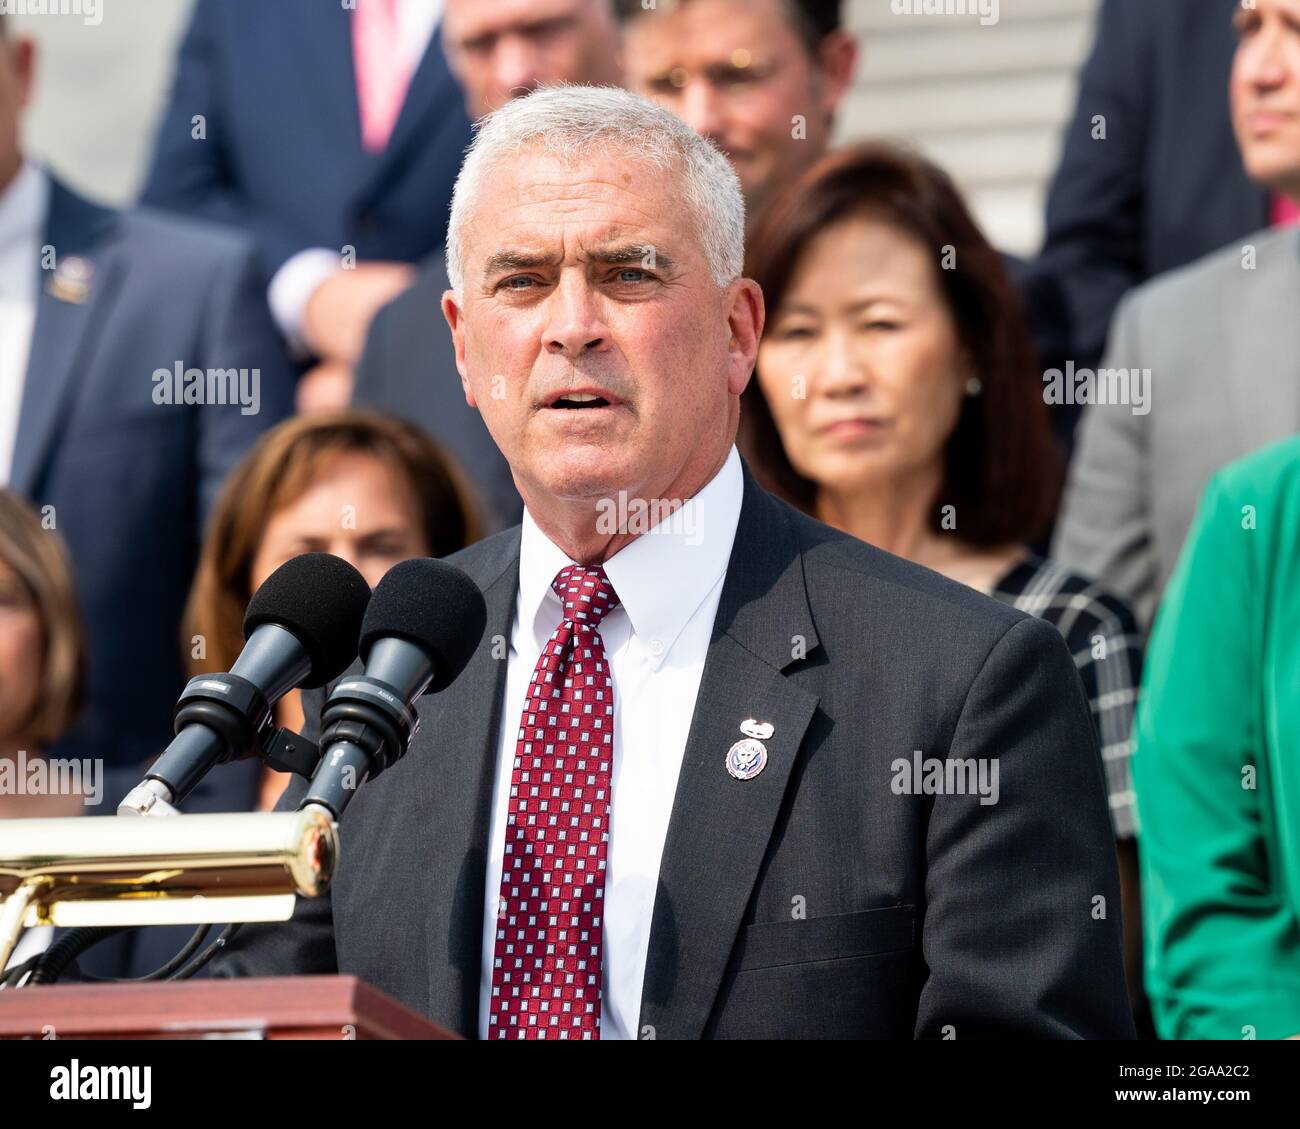 Washington, U.S. 29th July, 2021. July 29, 2021 - Washington, DC, United States: U.S. Representative Brad Wenstrup (R-OH) speaking at a press conference with House Republicans talking about President Joe Biden and House Speaker Nancy Pelosi's leadership. (Photo by Michael Brochstein/Sipa USA) Credit: Sipa USA/Alamy Live News Stock Photo